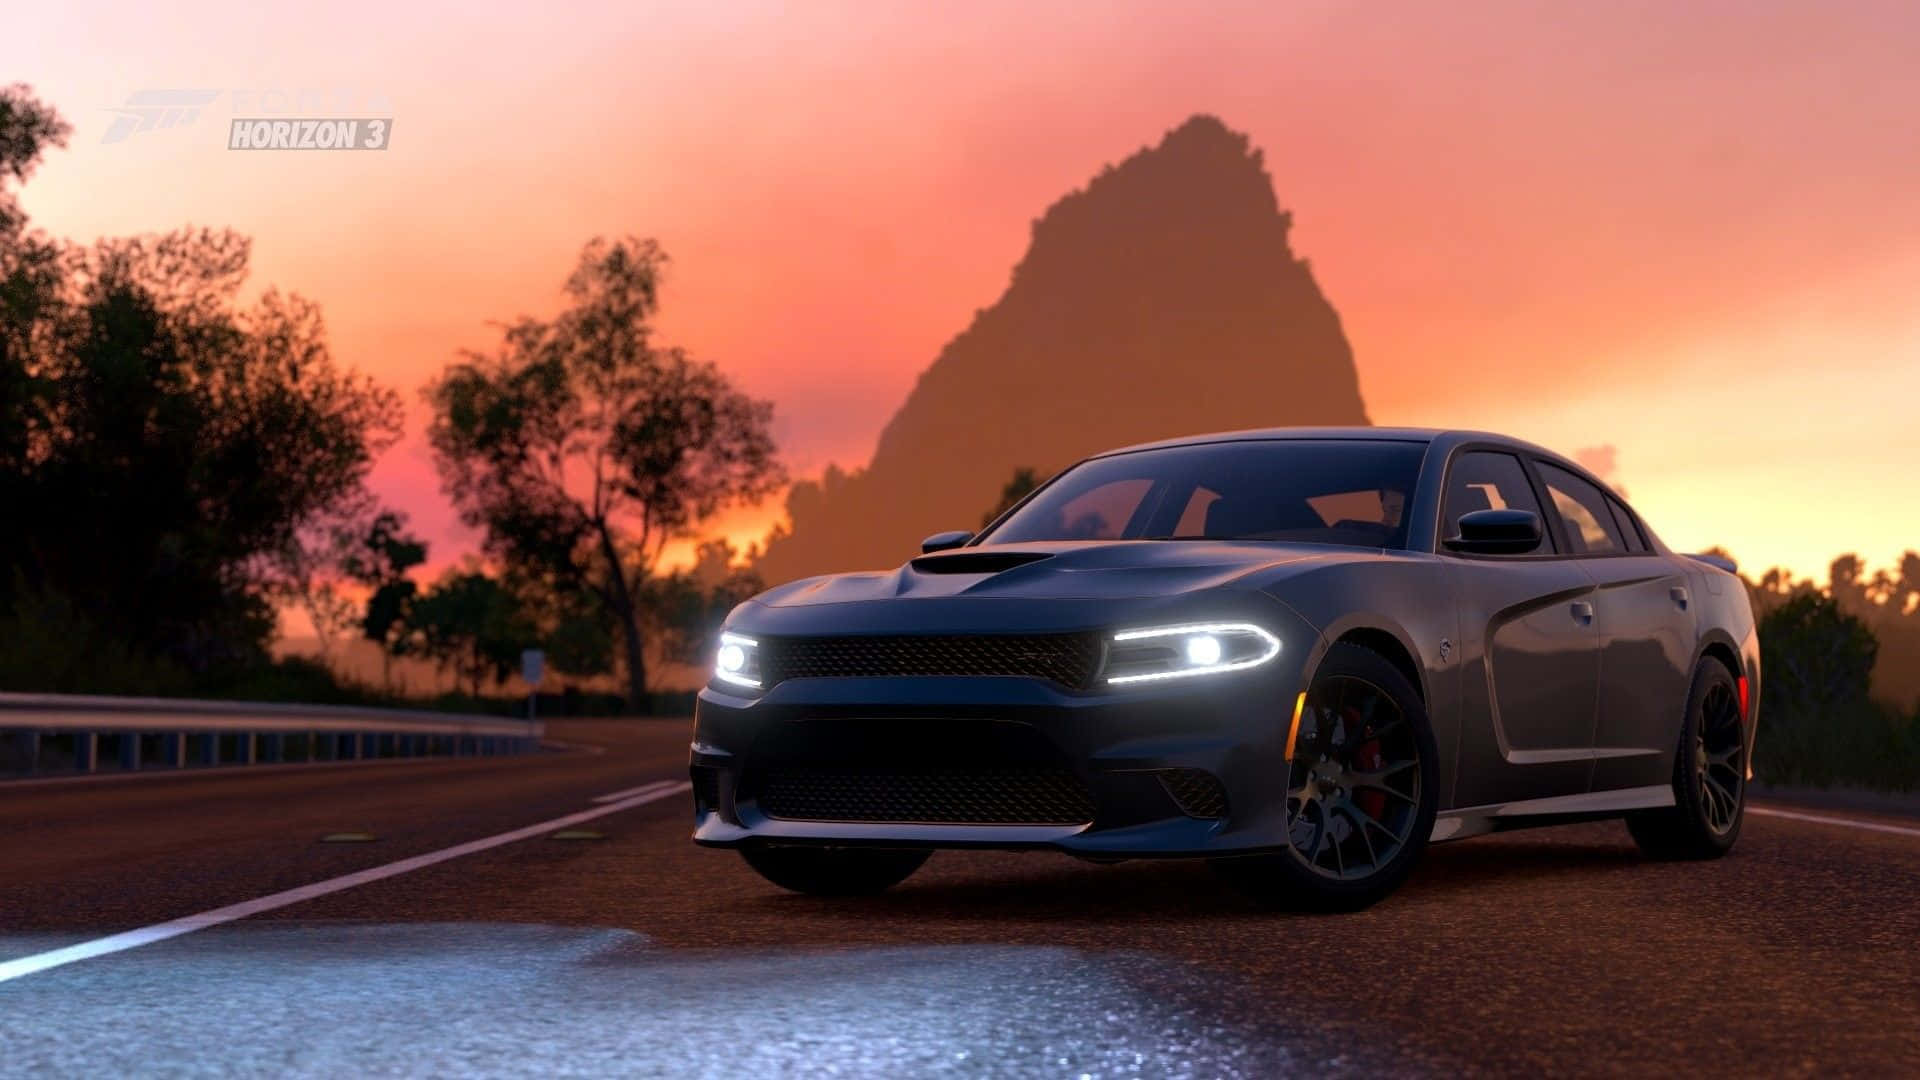 Caption: Stunning Dodge Charger in Action Wallpaper